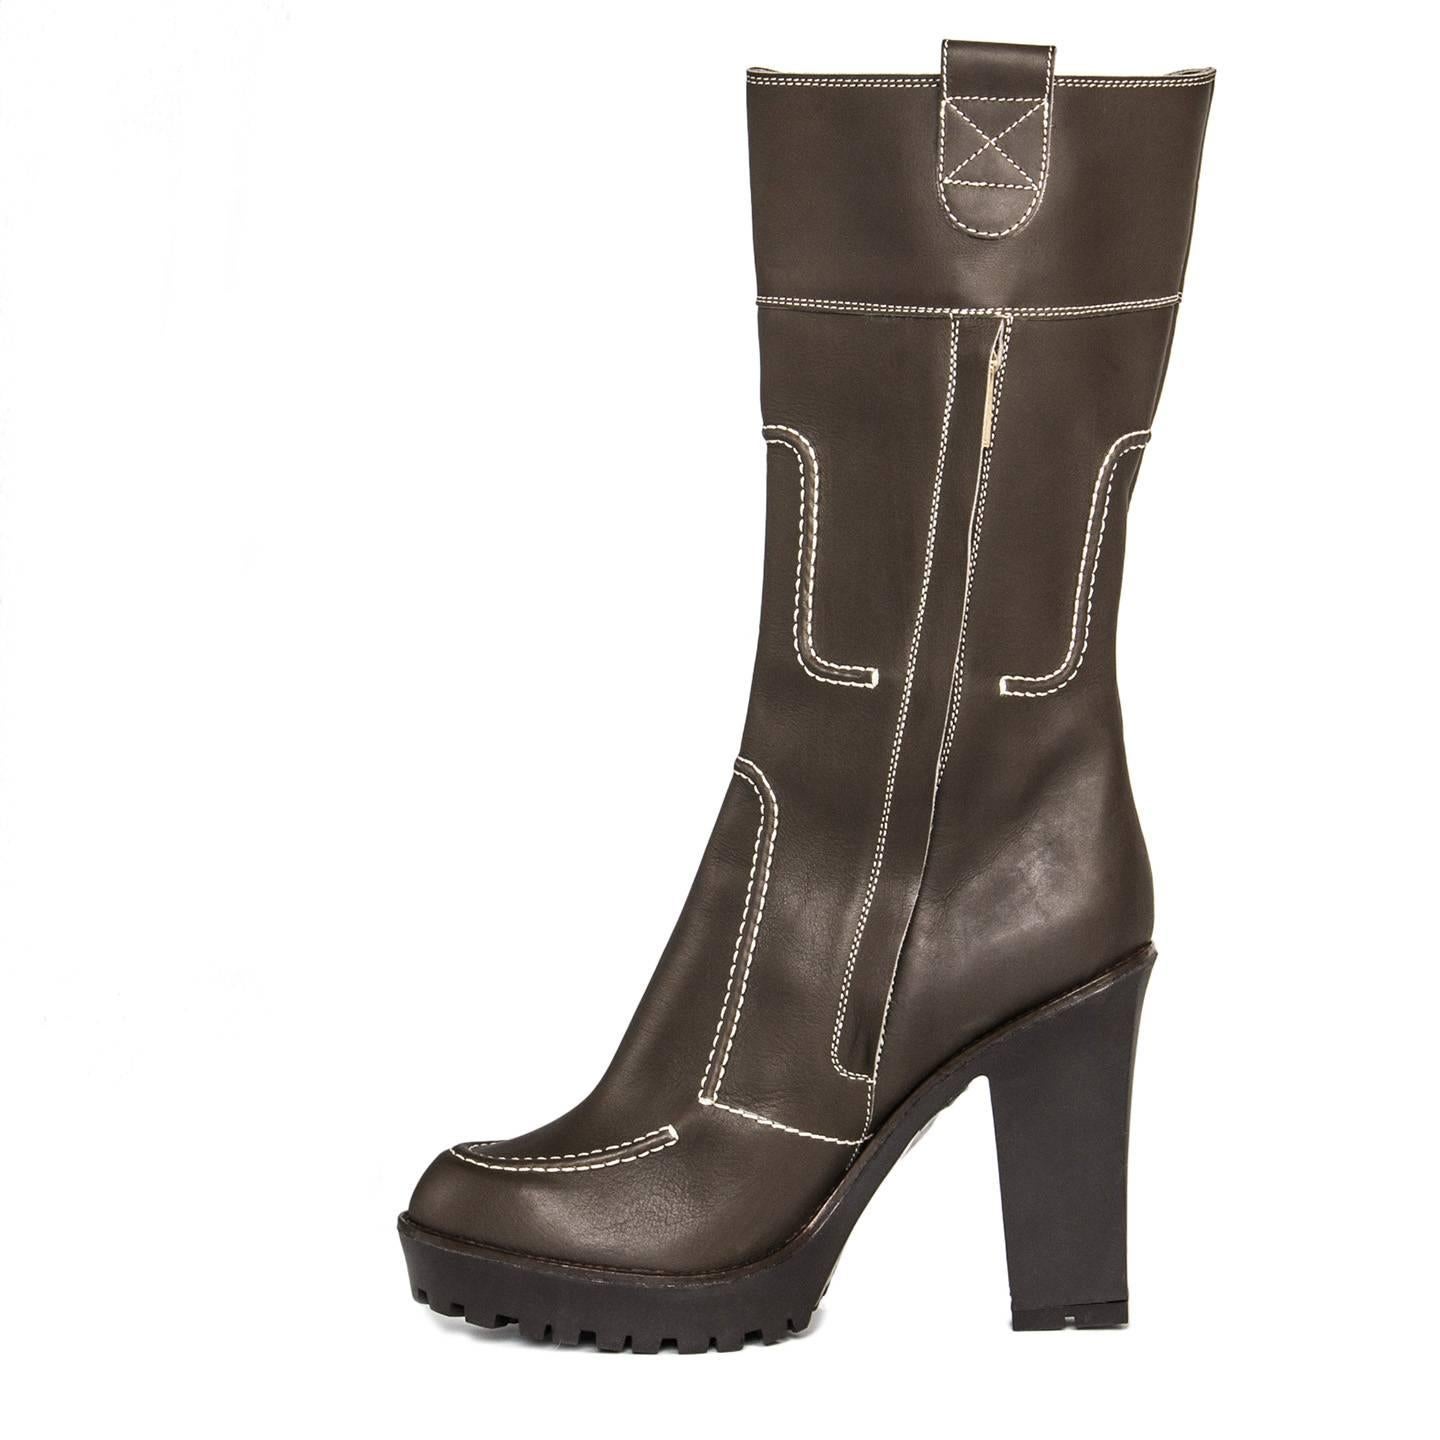 Yves Saint Laurent Brown Leather & Contrast Stitching Boots In New Condition For Sale In Brooklyn, NY